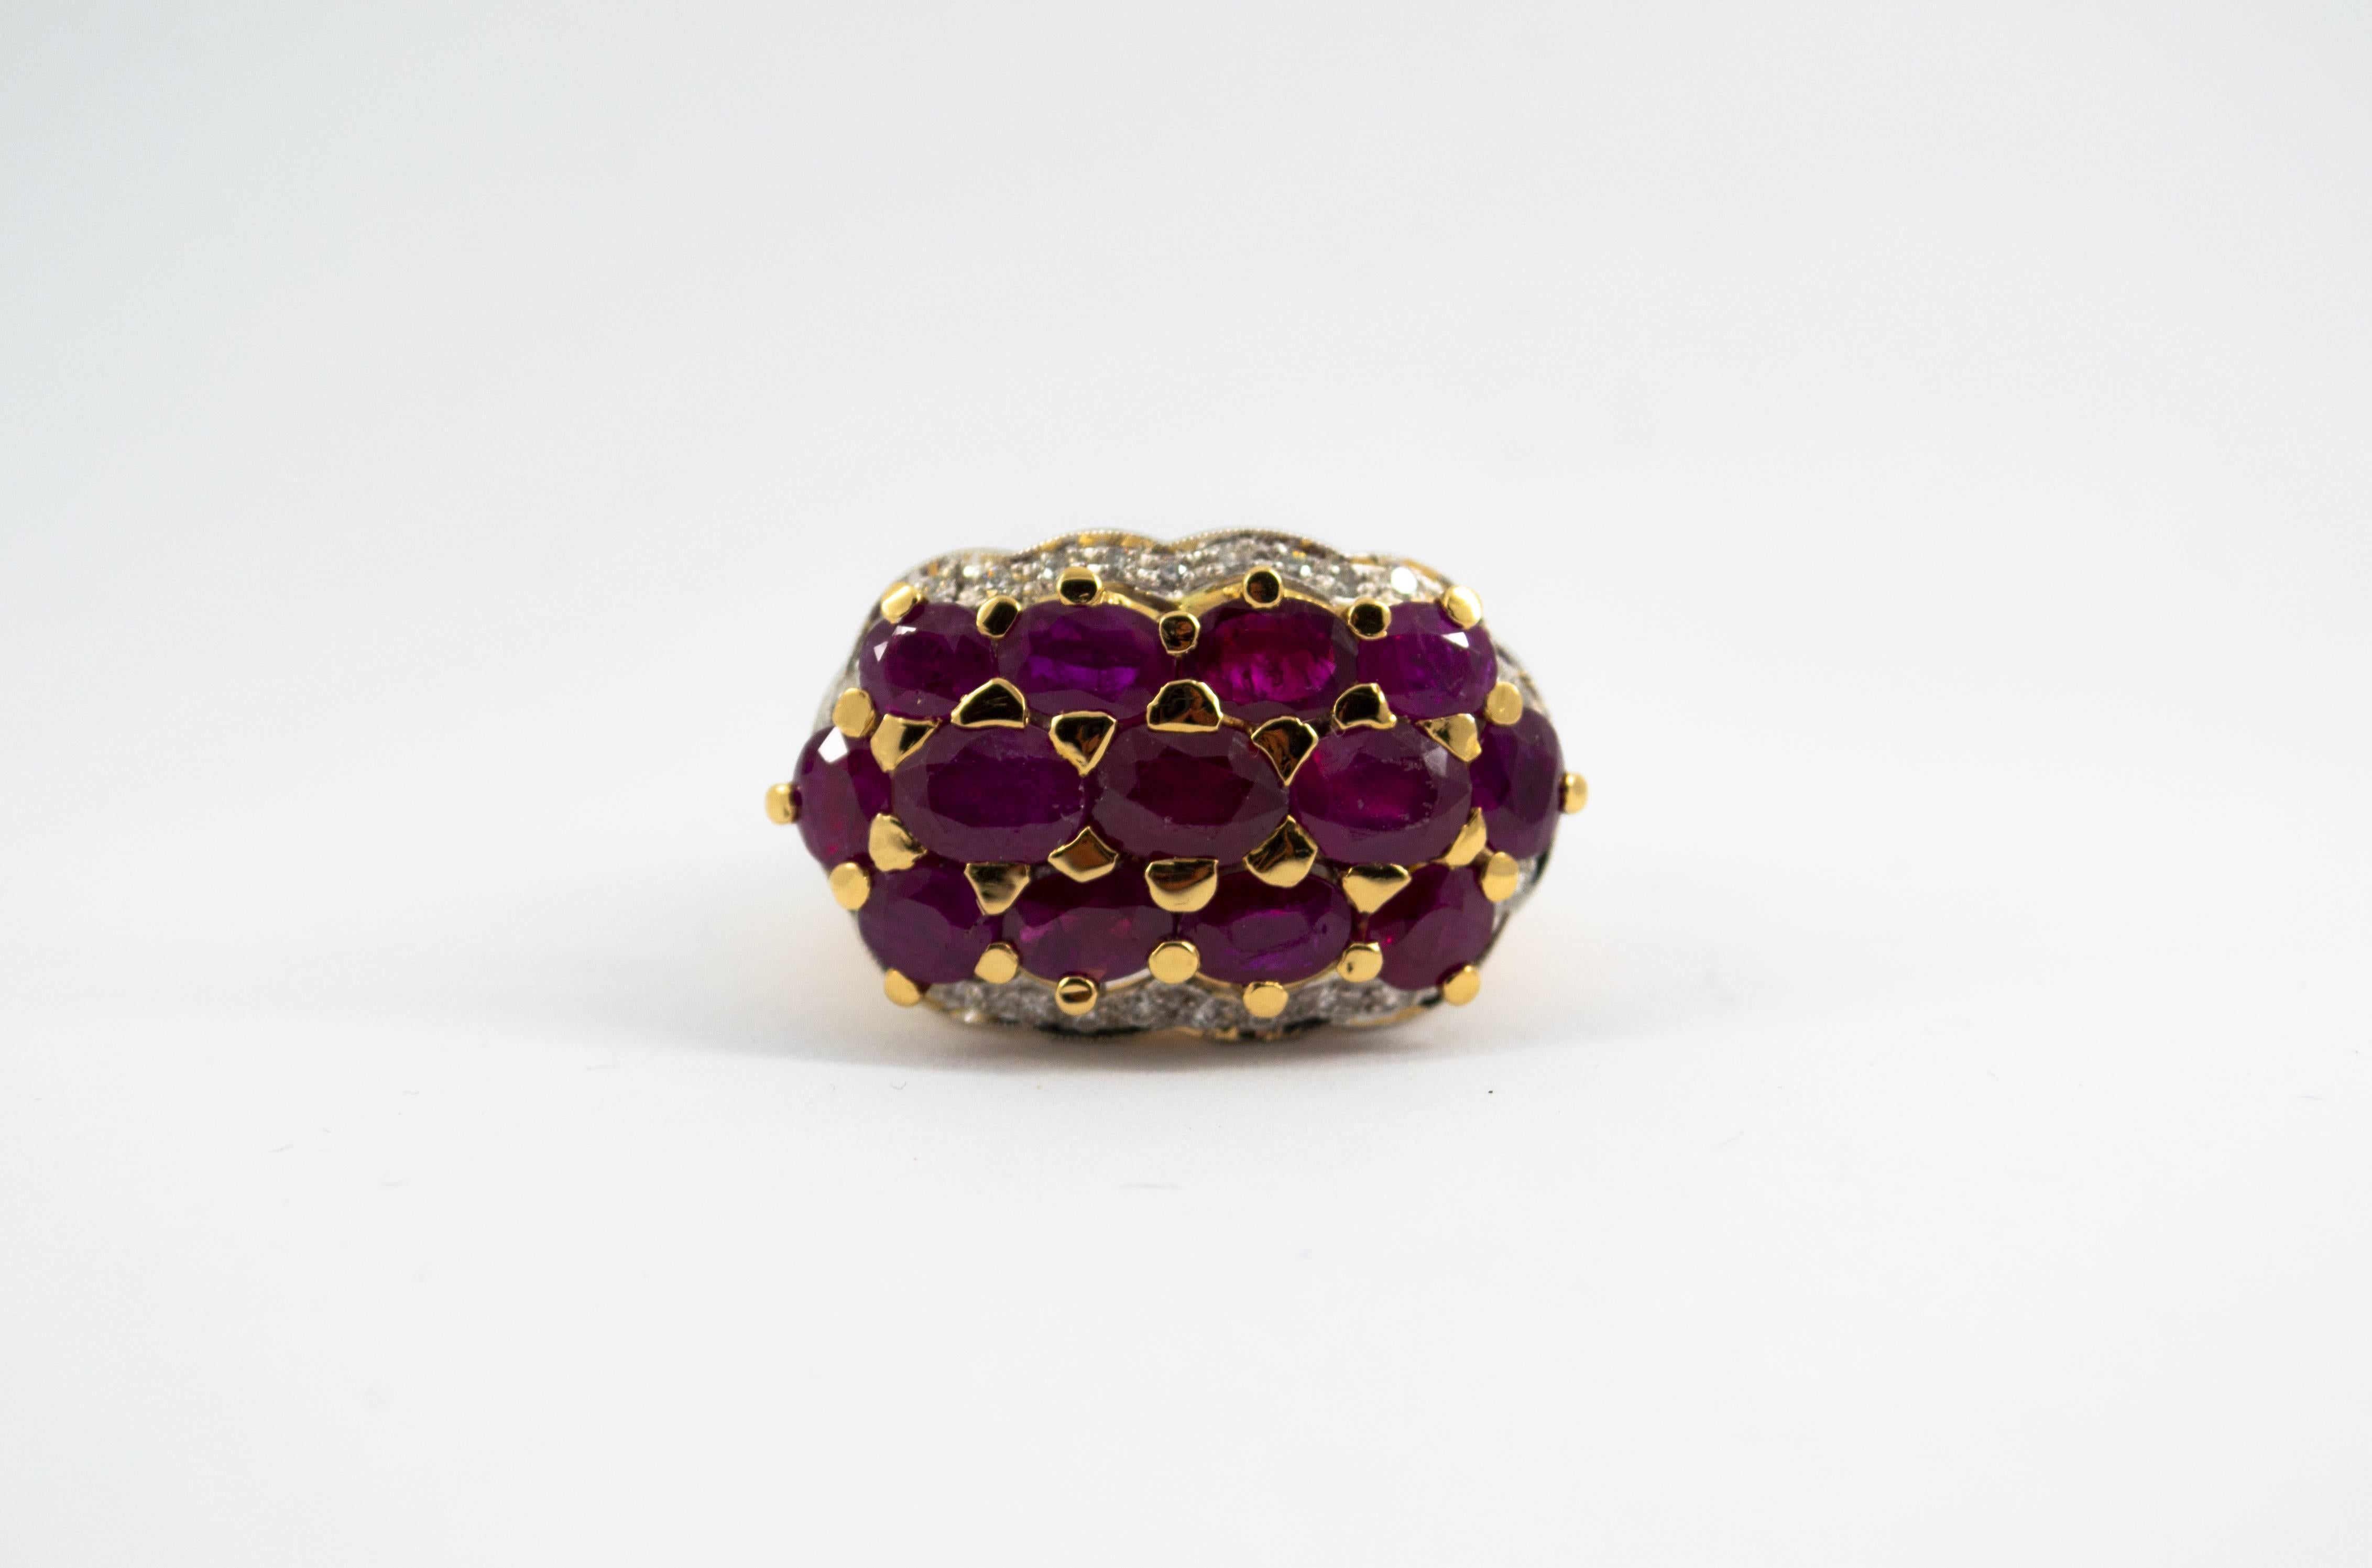 This Ring is made of 18K Yellow Gold.
This Ring has 0.50 Carats of Diamonds.
This Ring has 8.10 Carats of Rubies.
Size ITA: 19 USA: 8 1/2
We're a workshop so every piece is handmade, customizable and resizable.